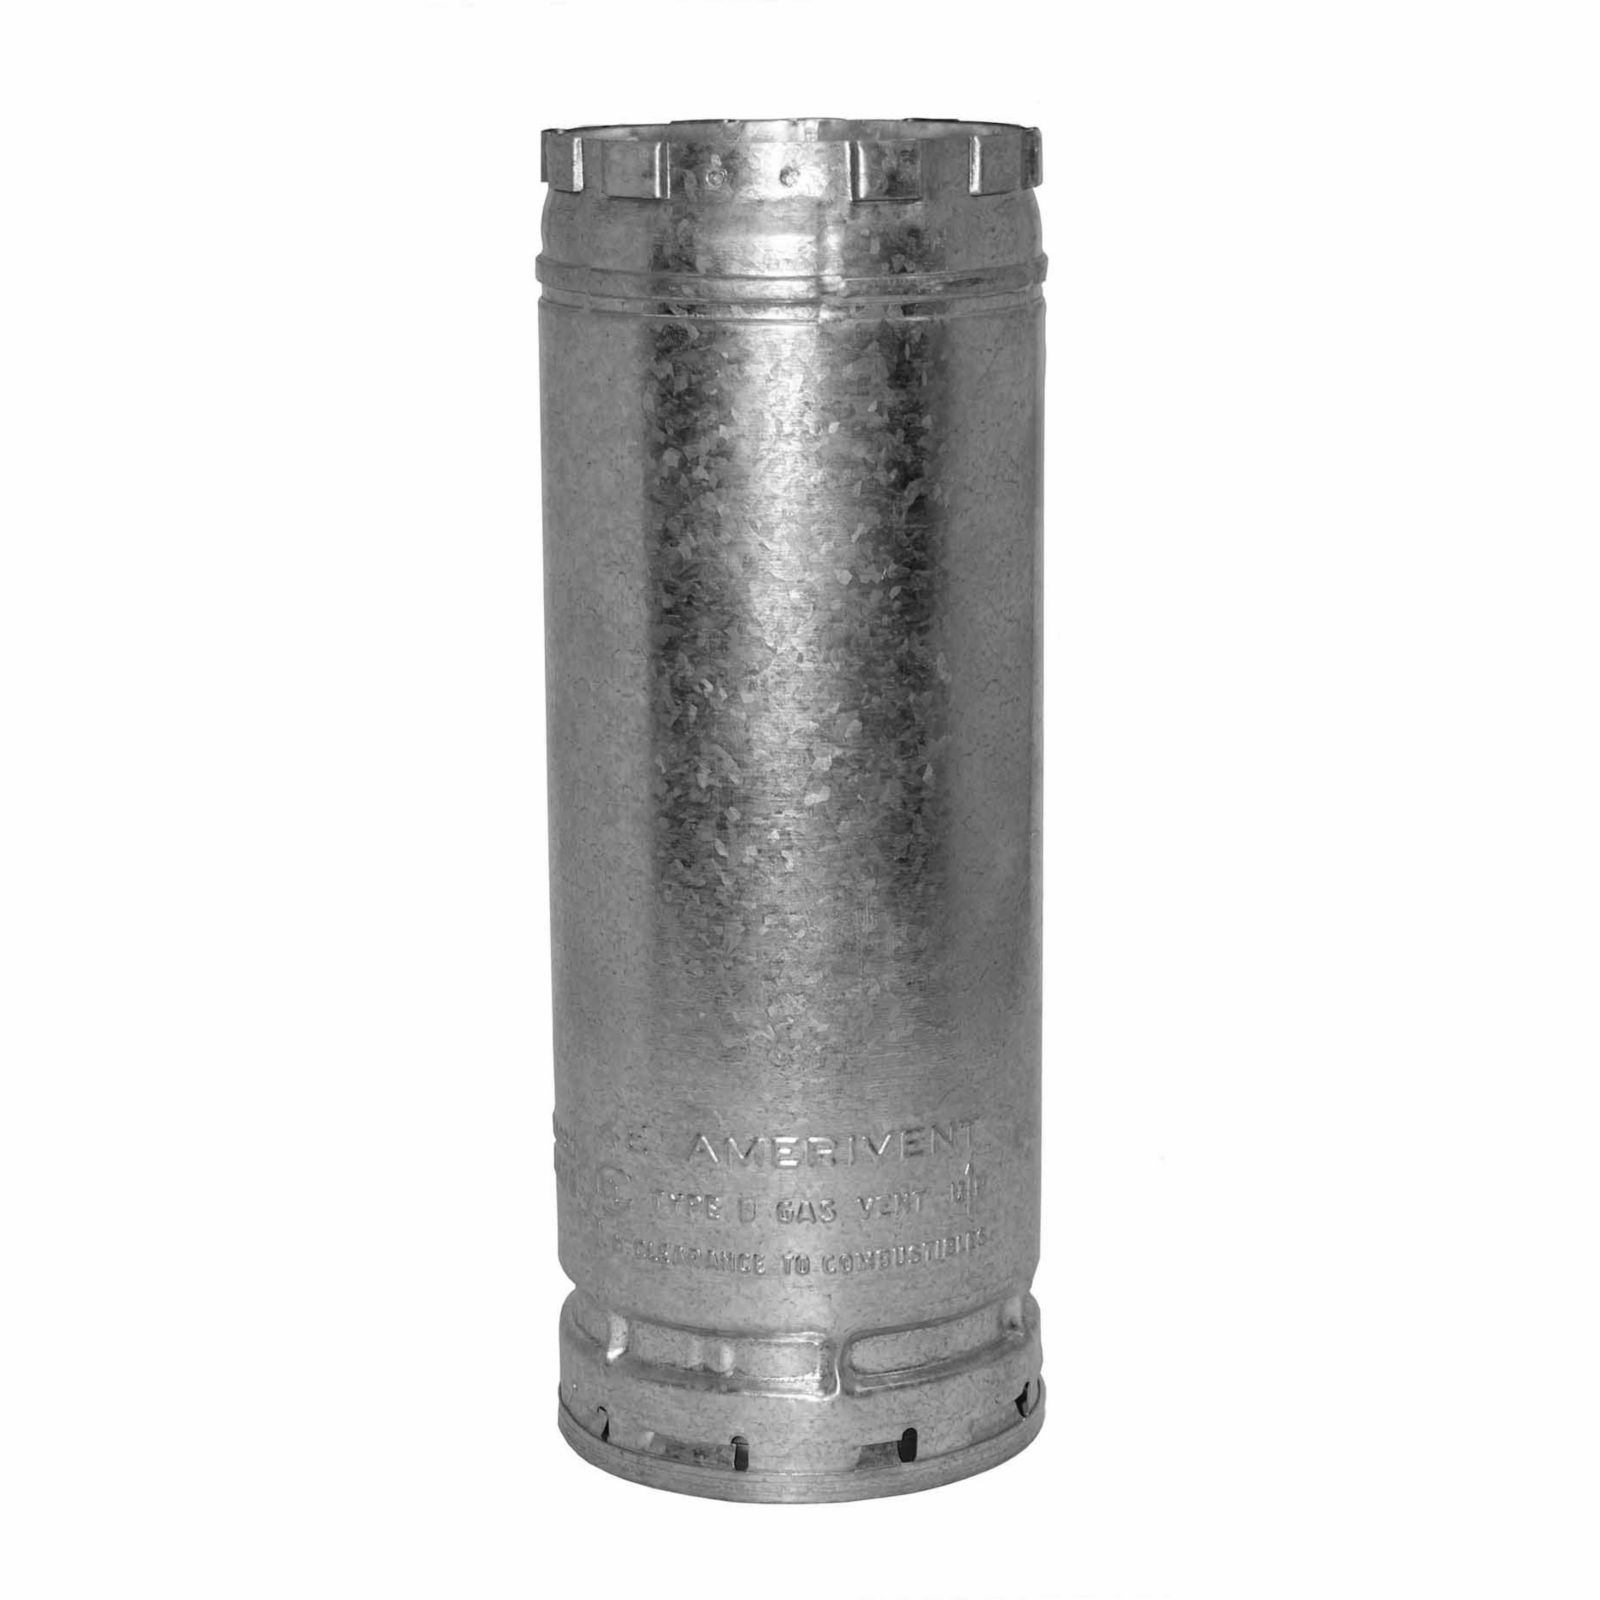 AmeriVent 6E5 - Pipe Section Type B Gas Vent, 6" Round X 60" Length